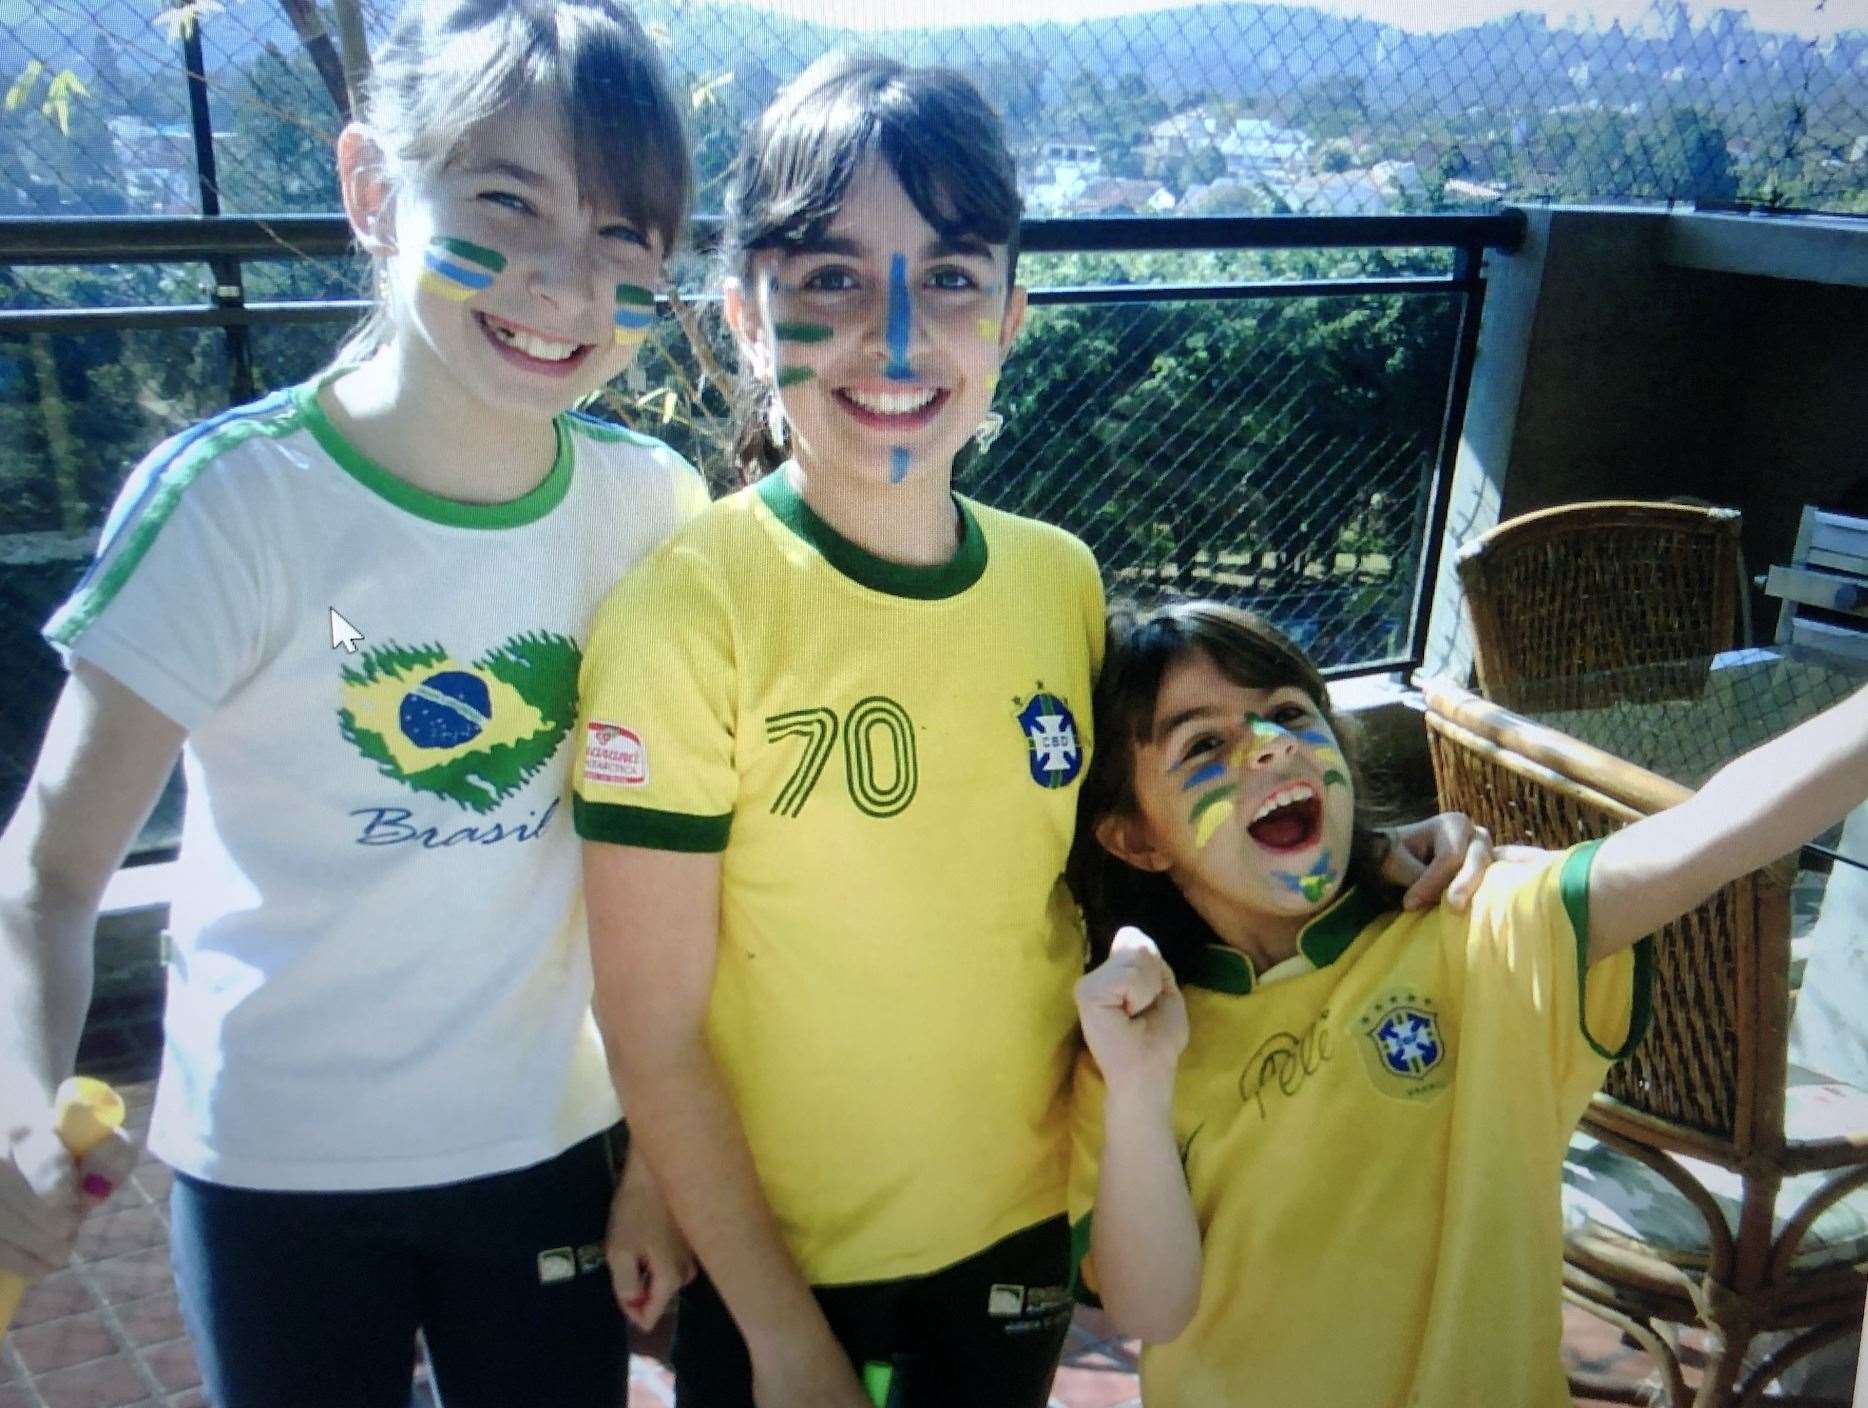 Young July (centre) with her younger sister Gabriela (right) and her school friend Jessica (left) ready to watch the 2010 World Cup